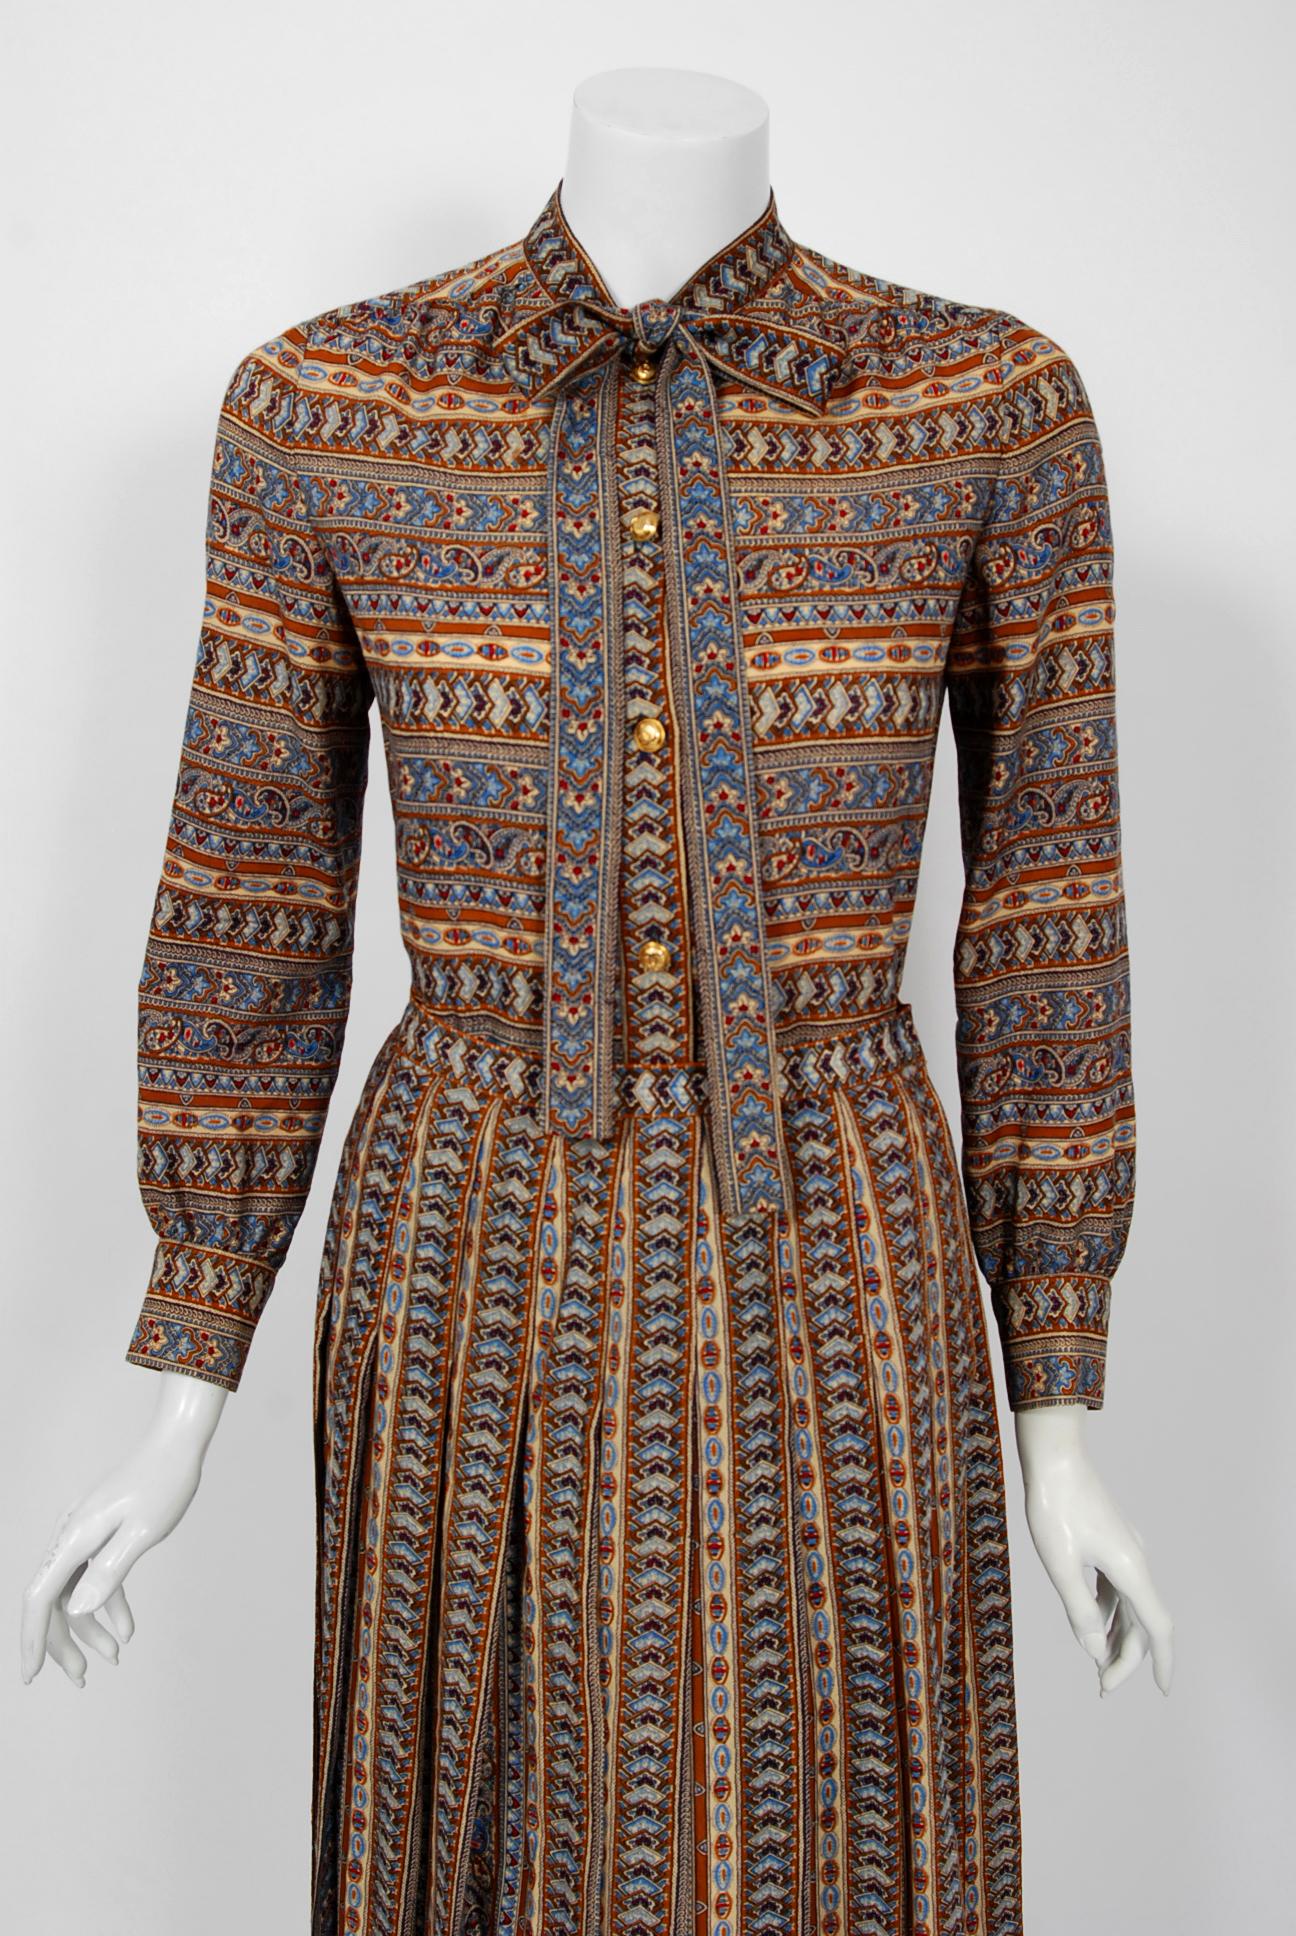 Chanel is known to be one of the most luxurious and decadent fashion houses in the world. This breathtaking blue brown paisley motif silk-wool blend ensemble from 1977 is a perfect example of why this couture brand has stood the test of time. Not